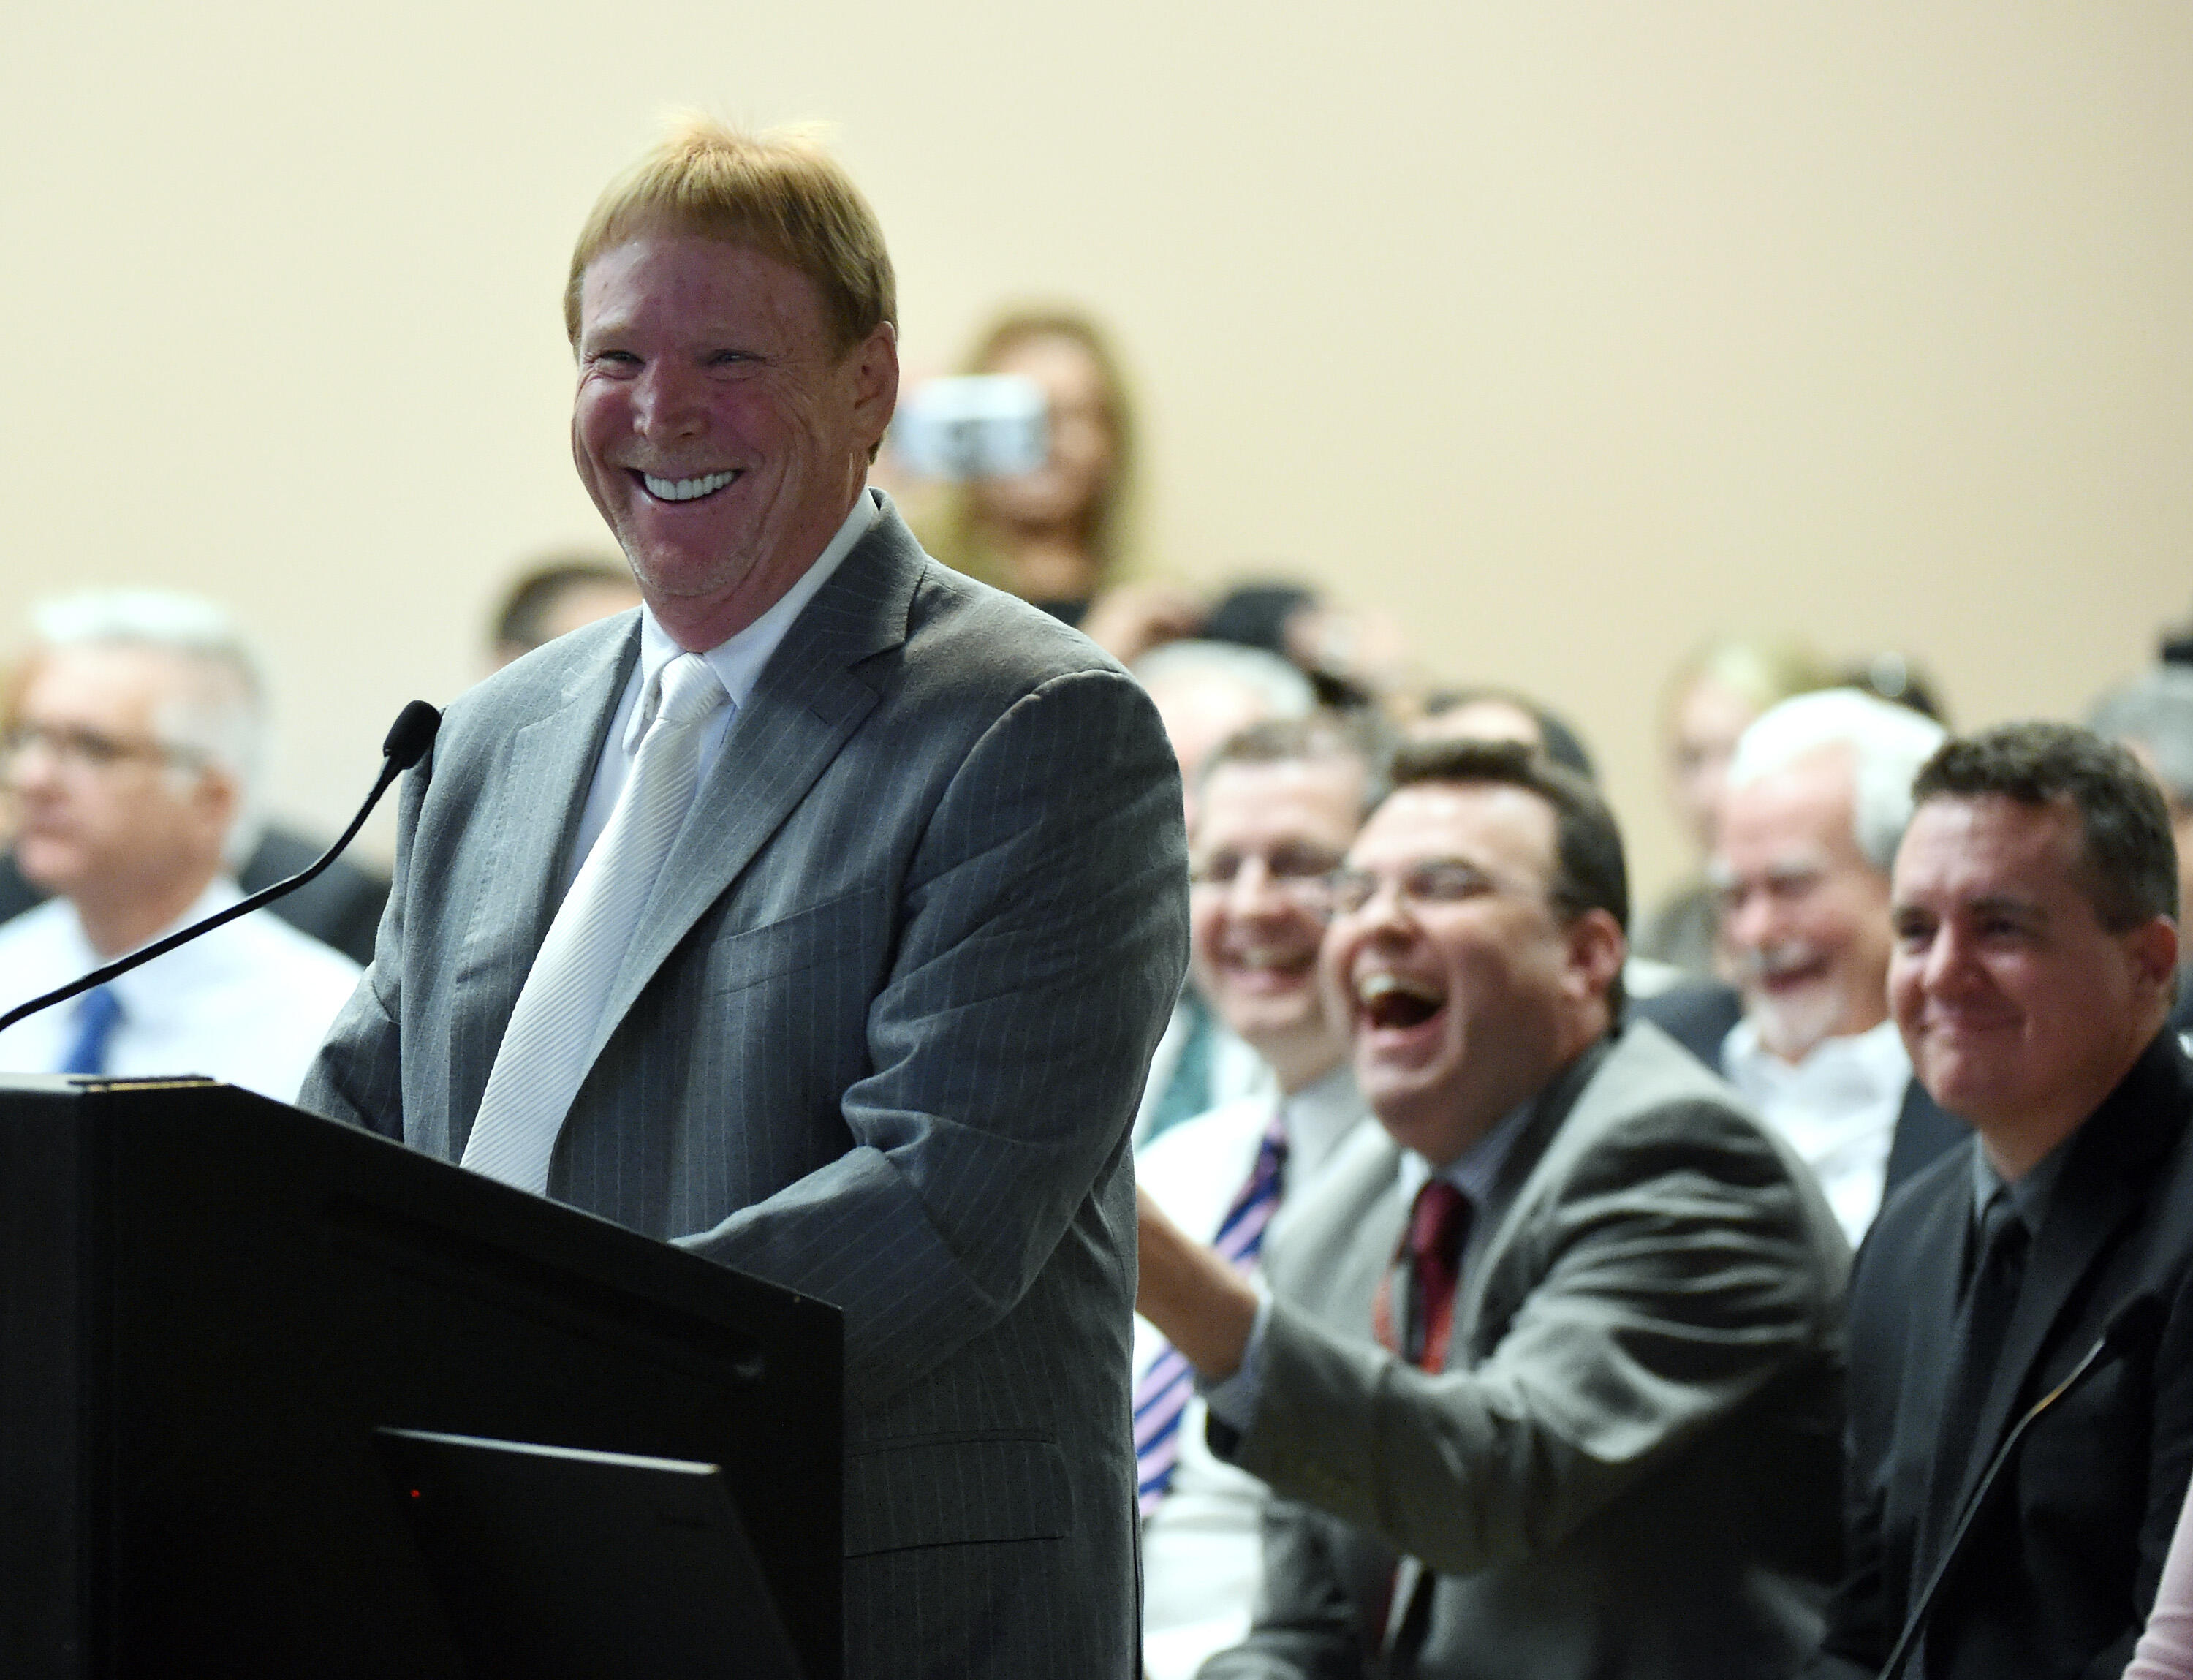 LAS VEGAS, NV - APRIL 28:  Oakland Raiders owner Mark Davis speaks during a Southern Nevada Tourism Infrastructure Committee meeting at UNLV on April 28, 2016 in Las Vegas, Nevada. Davis told the committee he is willing to spend USD 500 million as part of